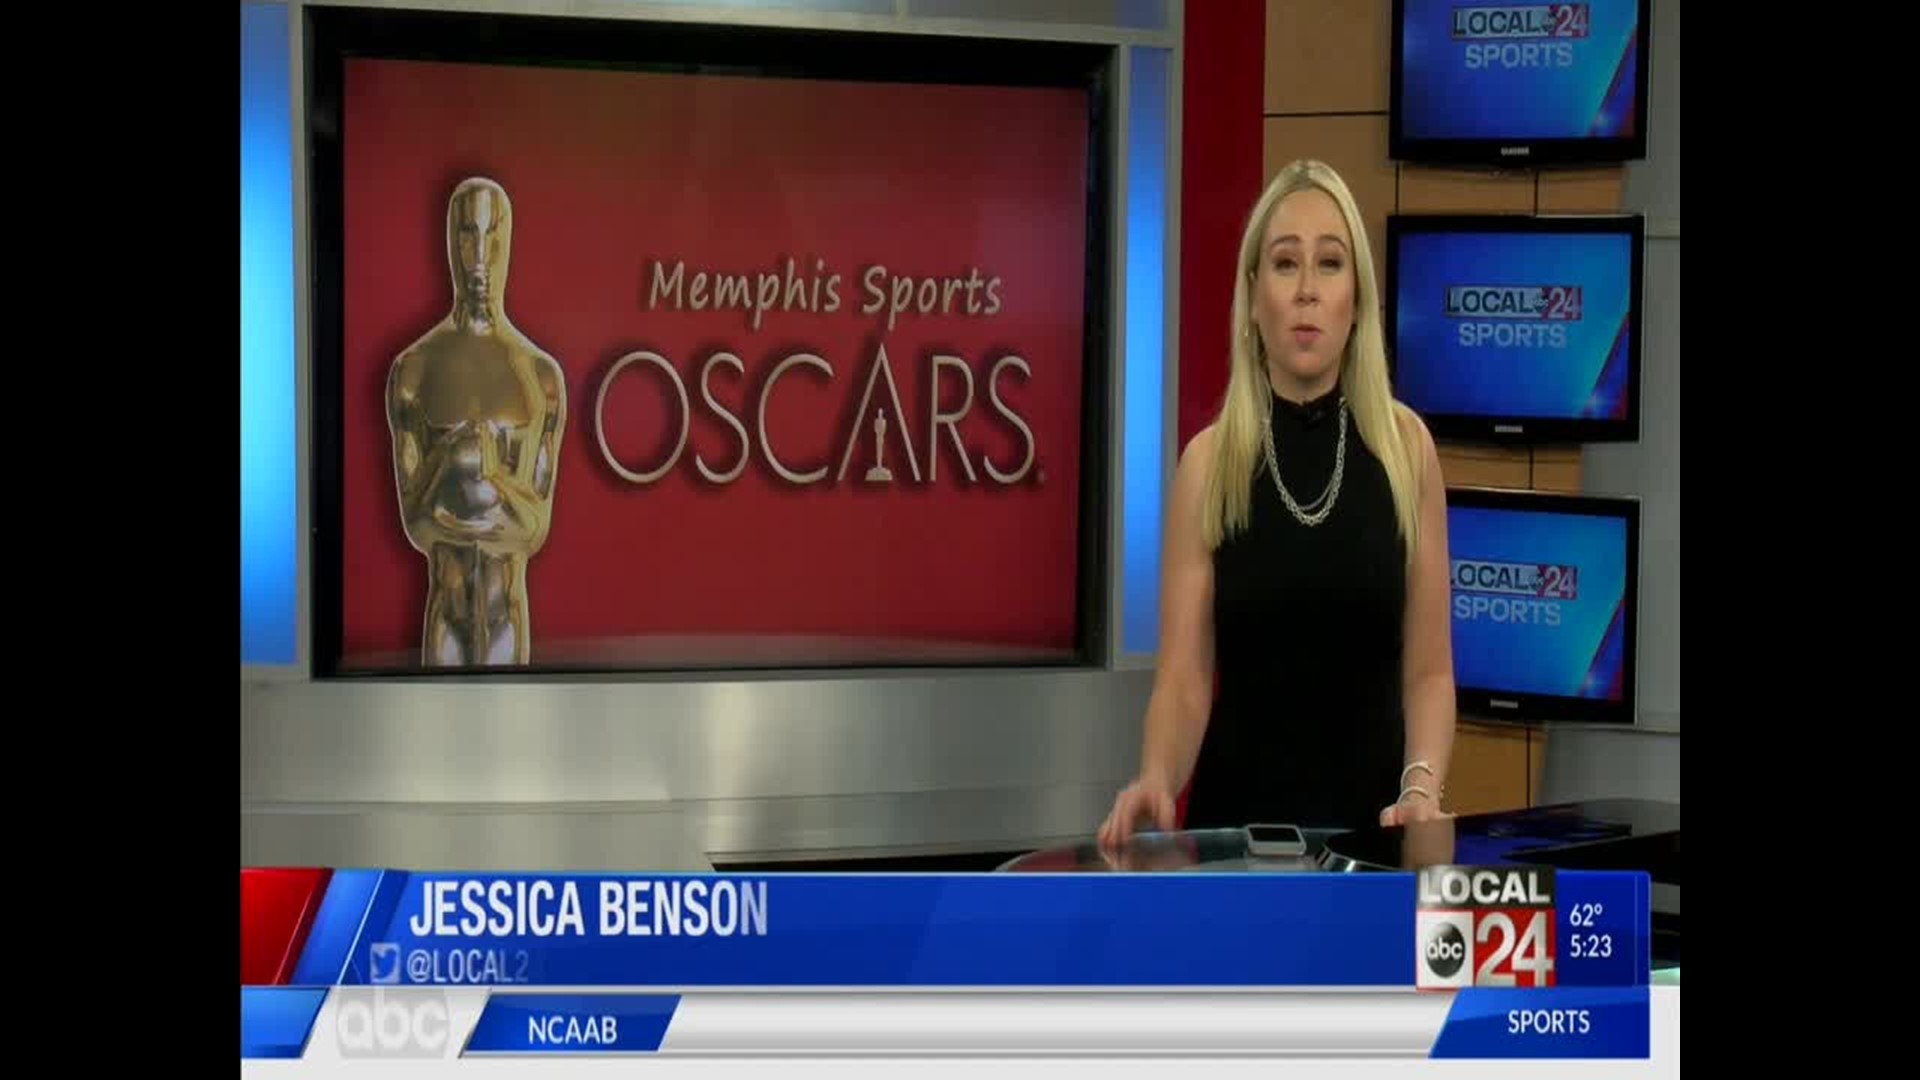 Local 24 Sports' Jessica Benson gives out some awards (in honor of Oscar night)